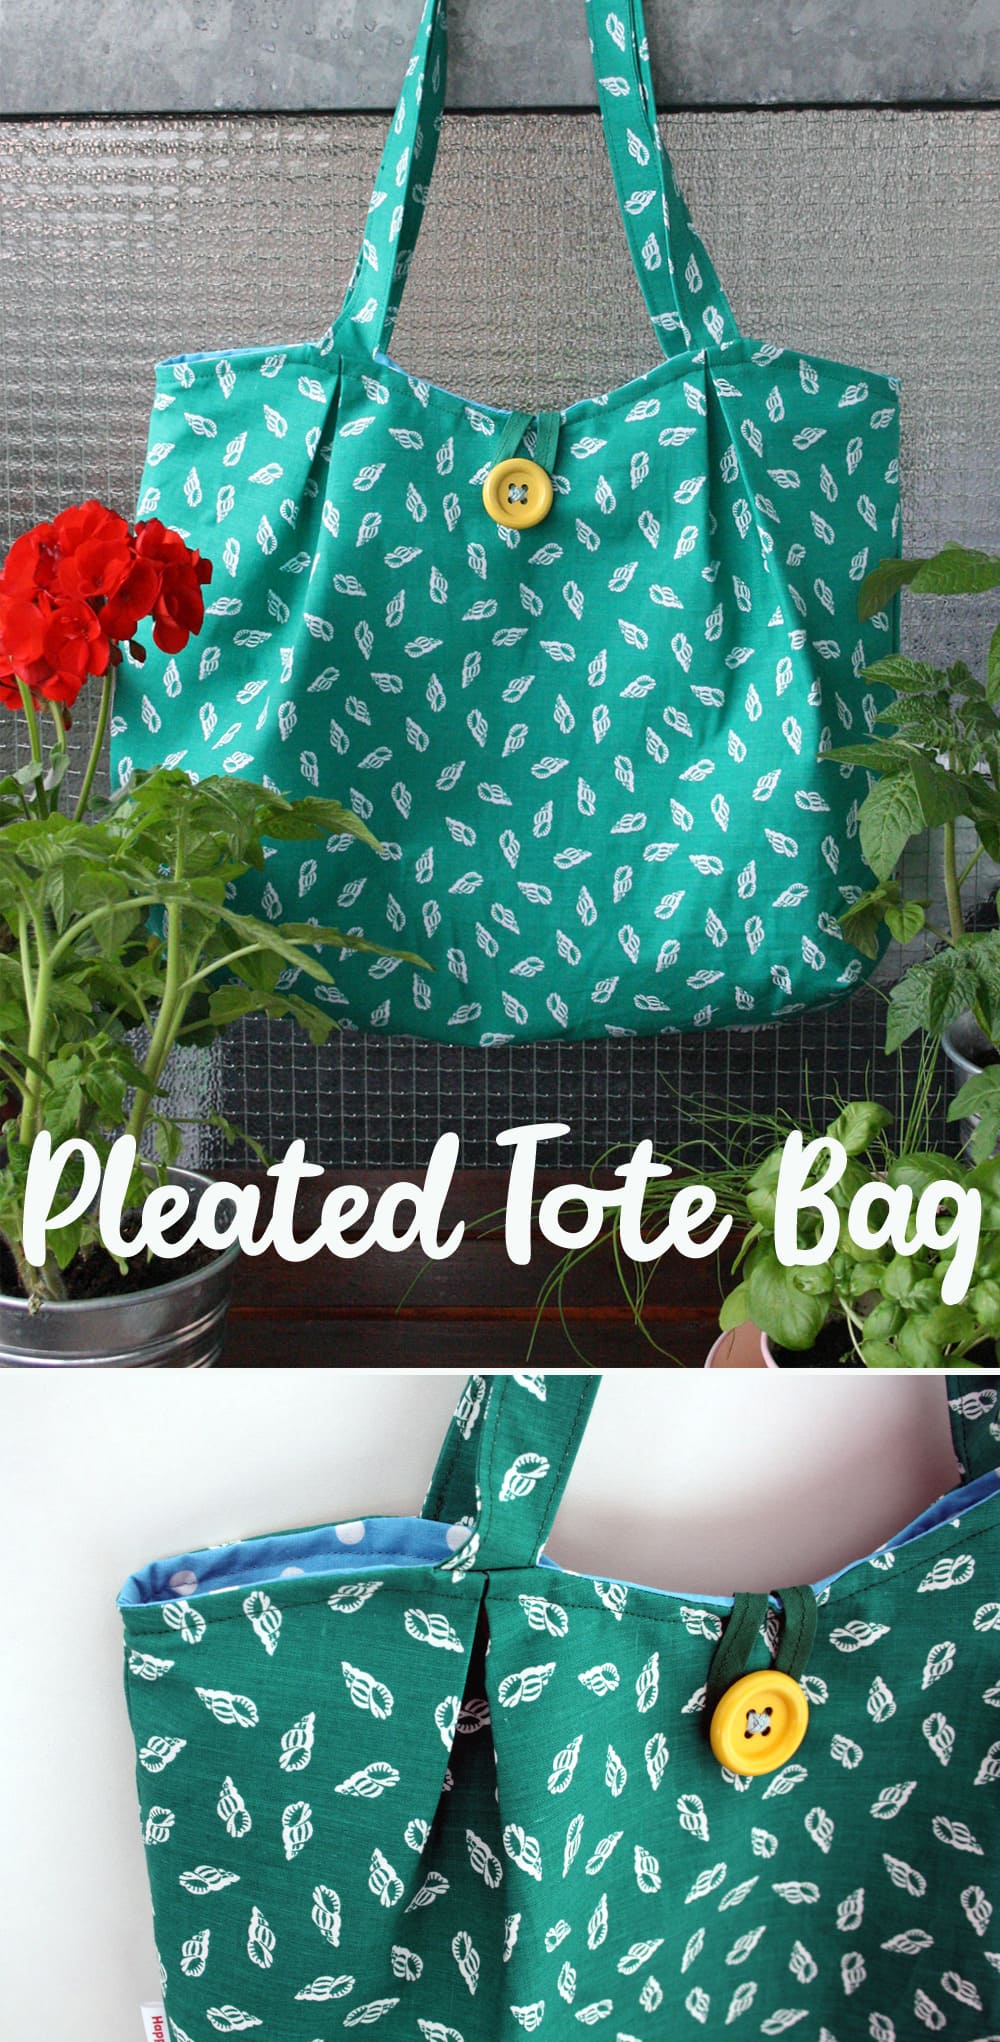 Pleated Tote Bag Free Pattern